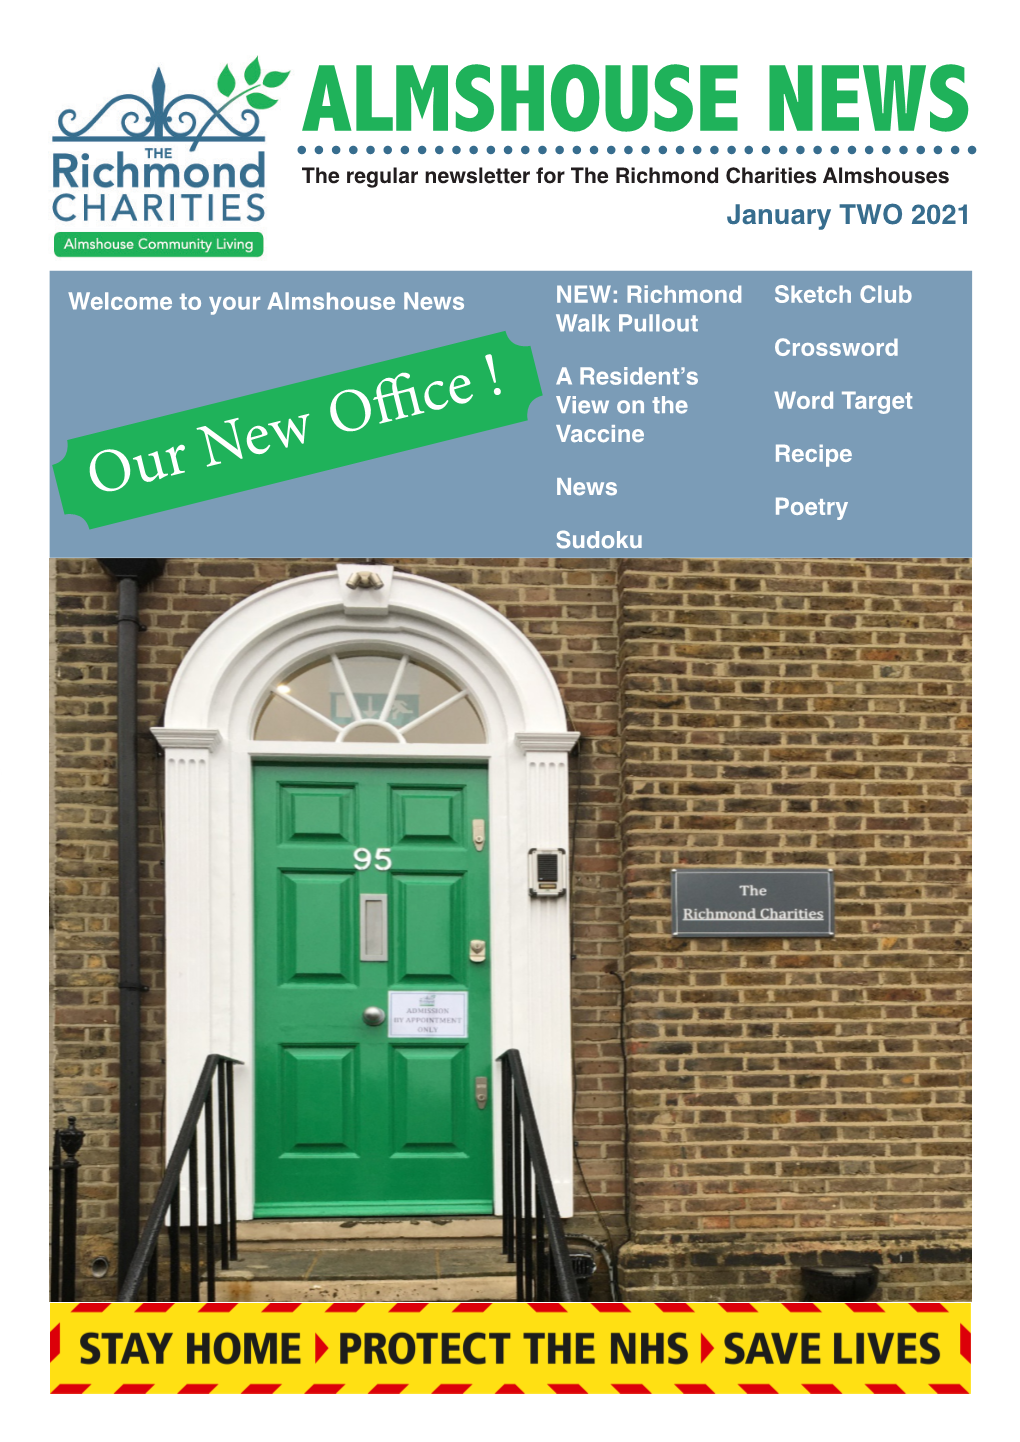 R New Office ! ALMSHOUSE NEWS - Contents